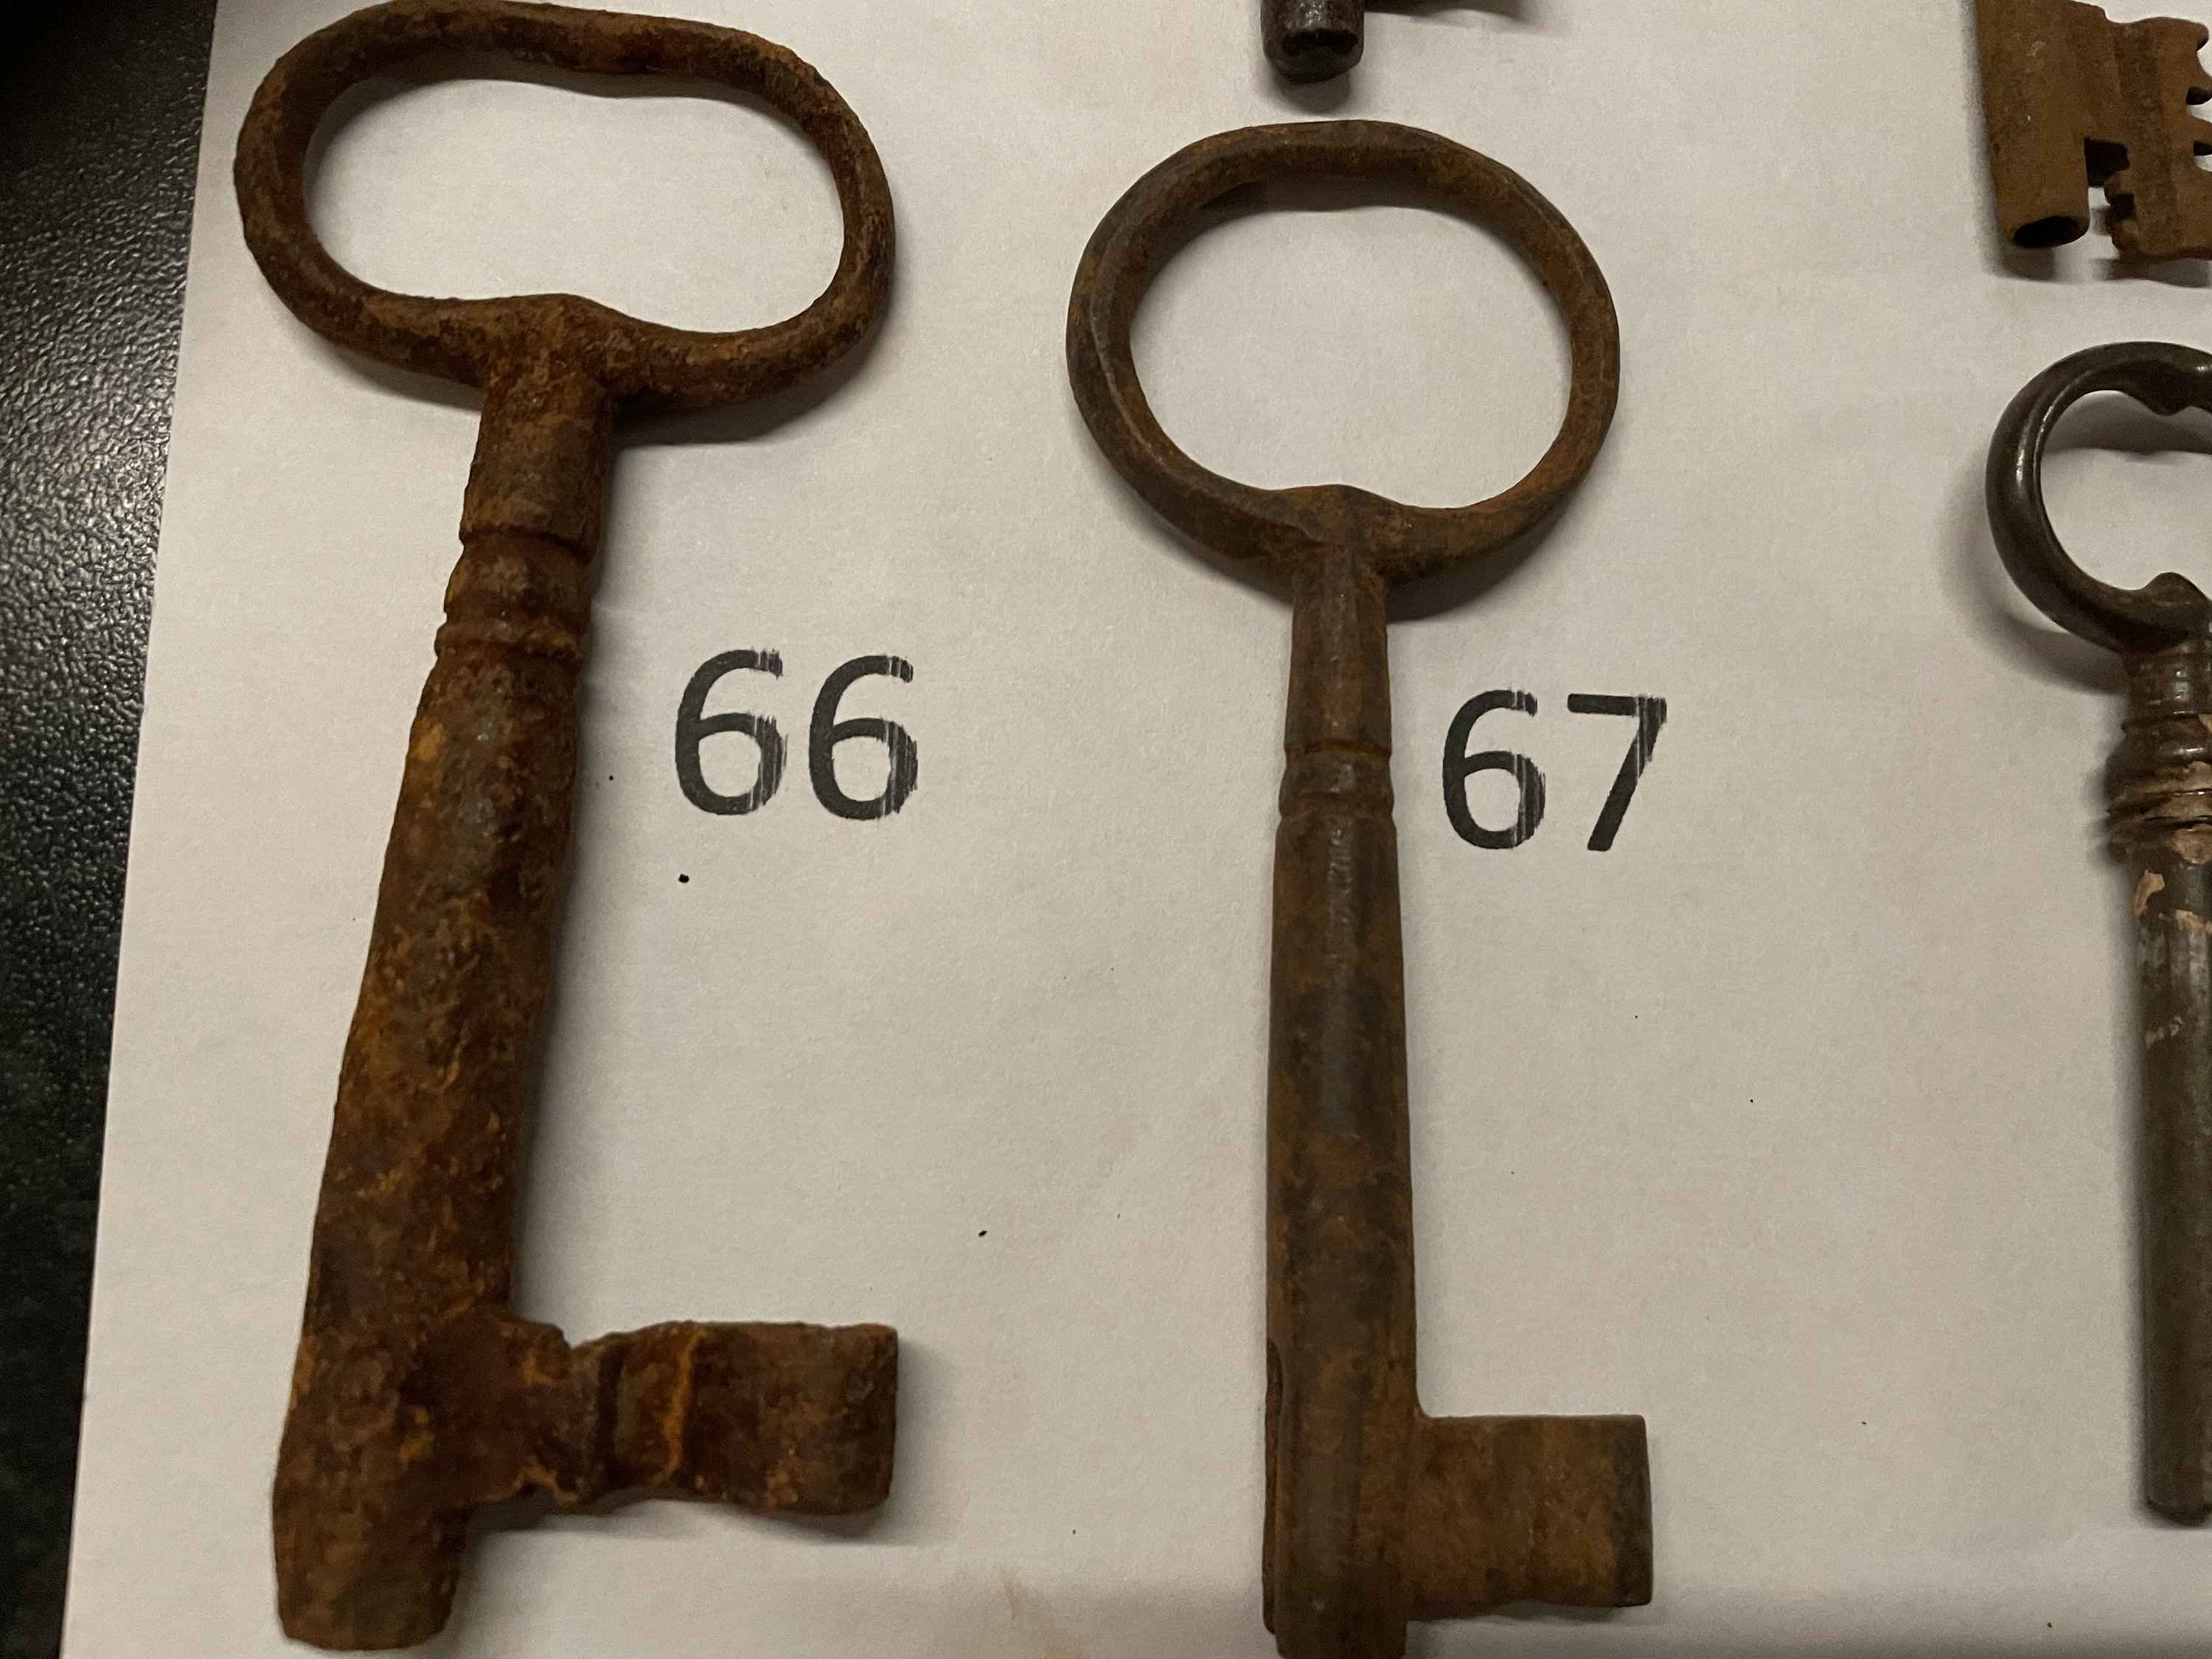 Antique Skeleton Keys From Spain and Portugal 5.5 to 10 Cm 2-4 Inches.  Antique, Not Reproduction Price is per Key. Same Price 